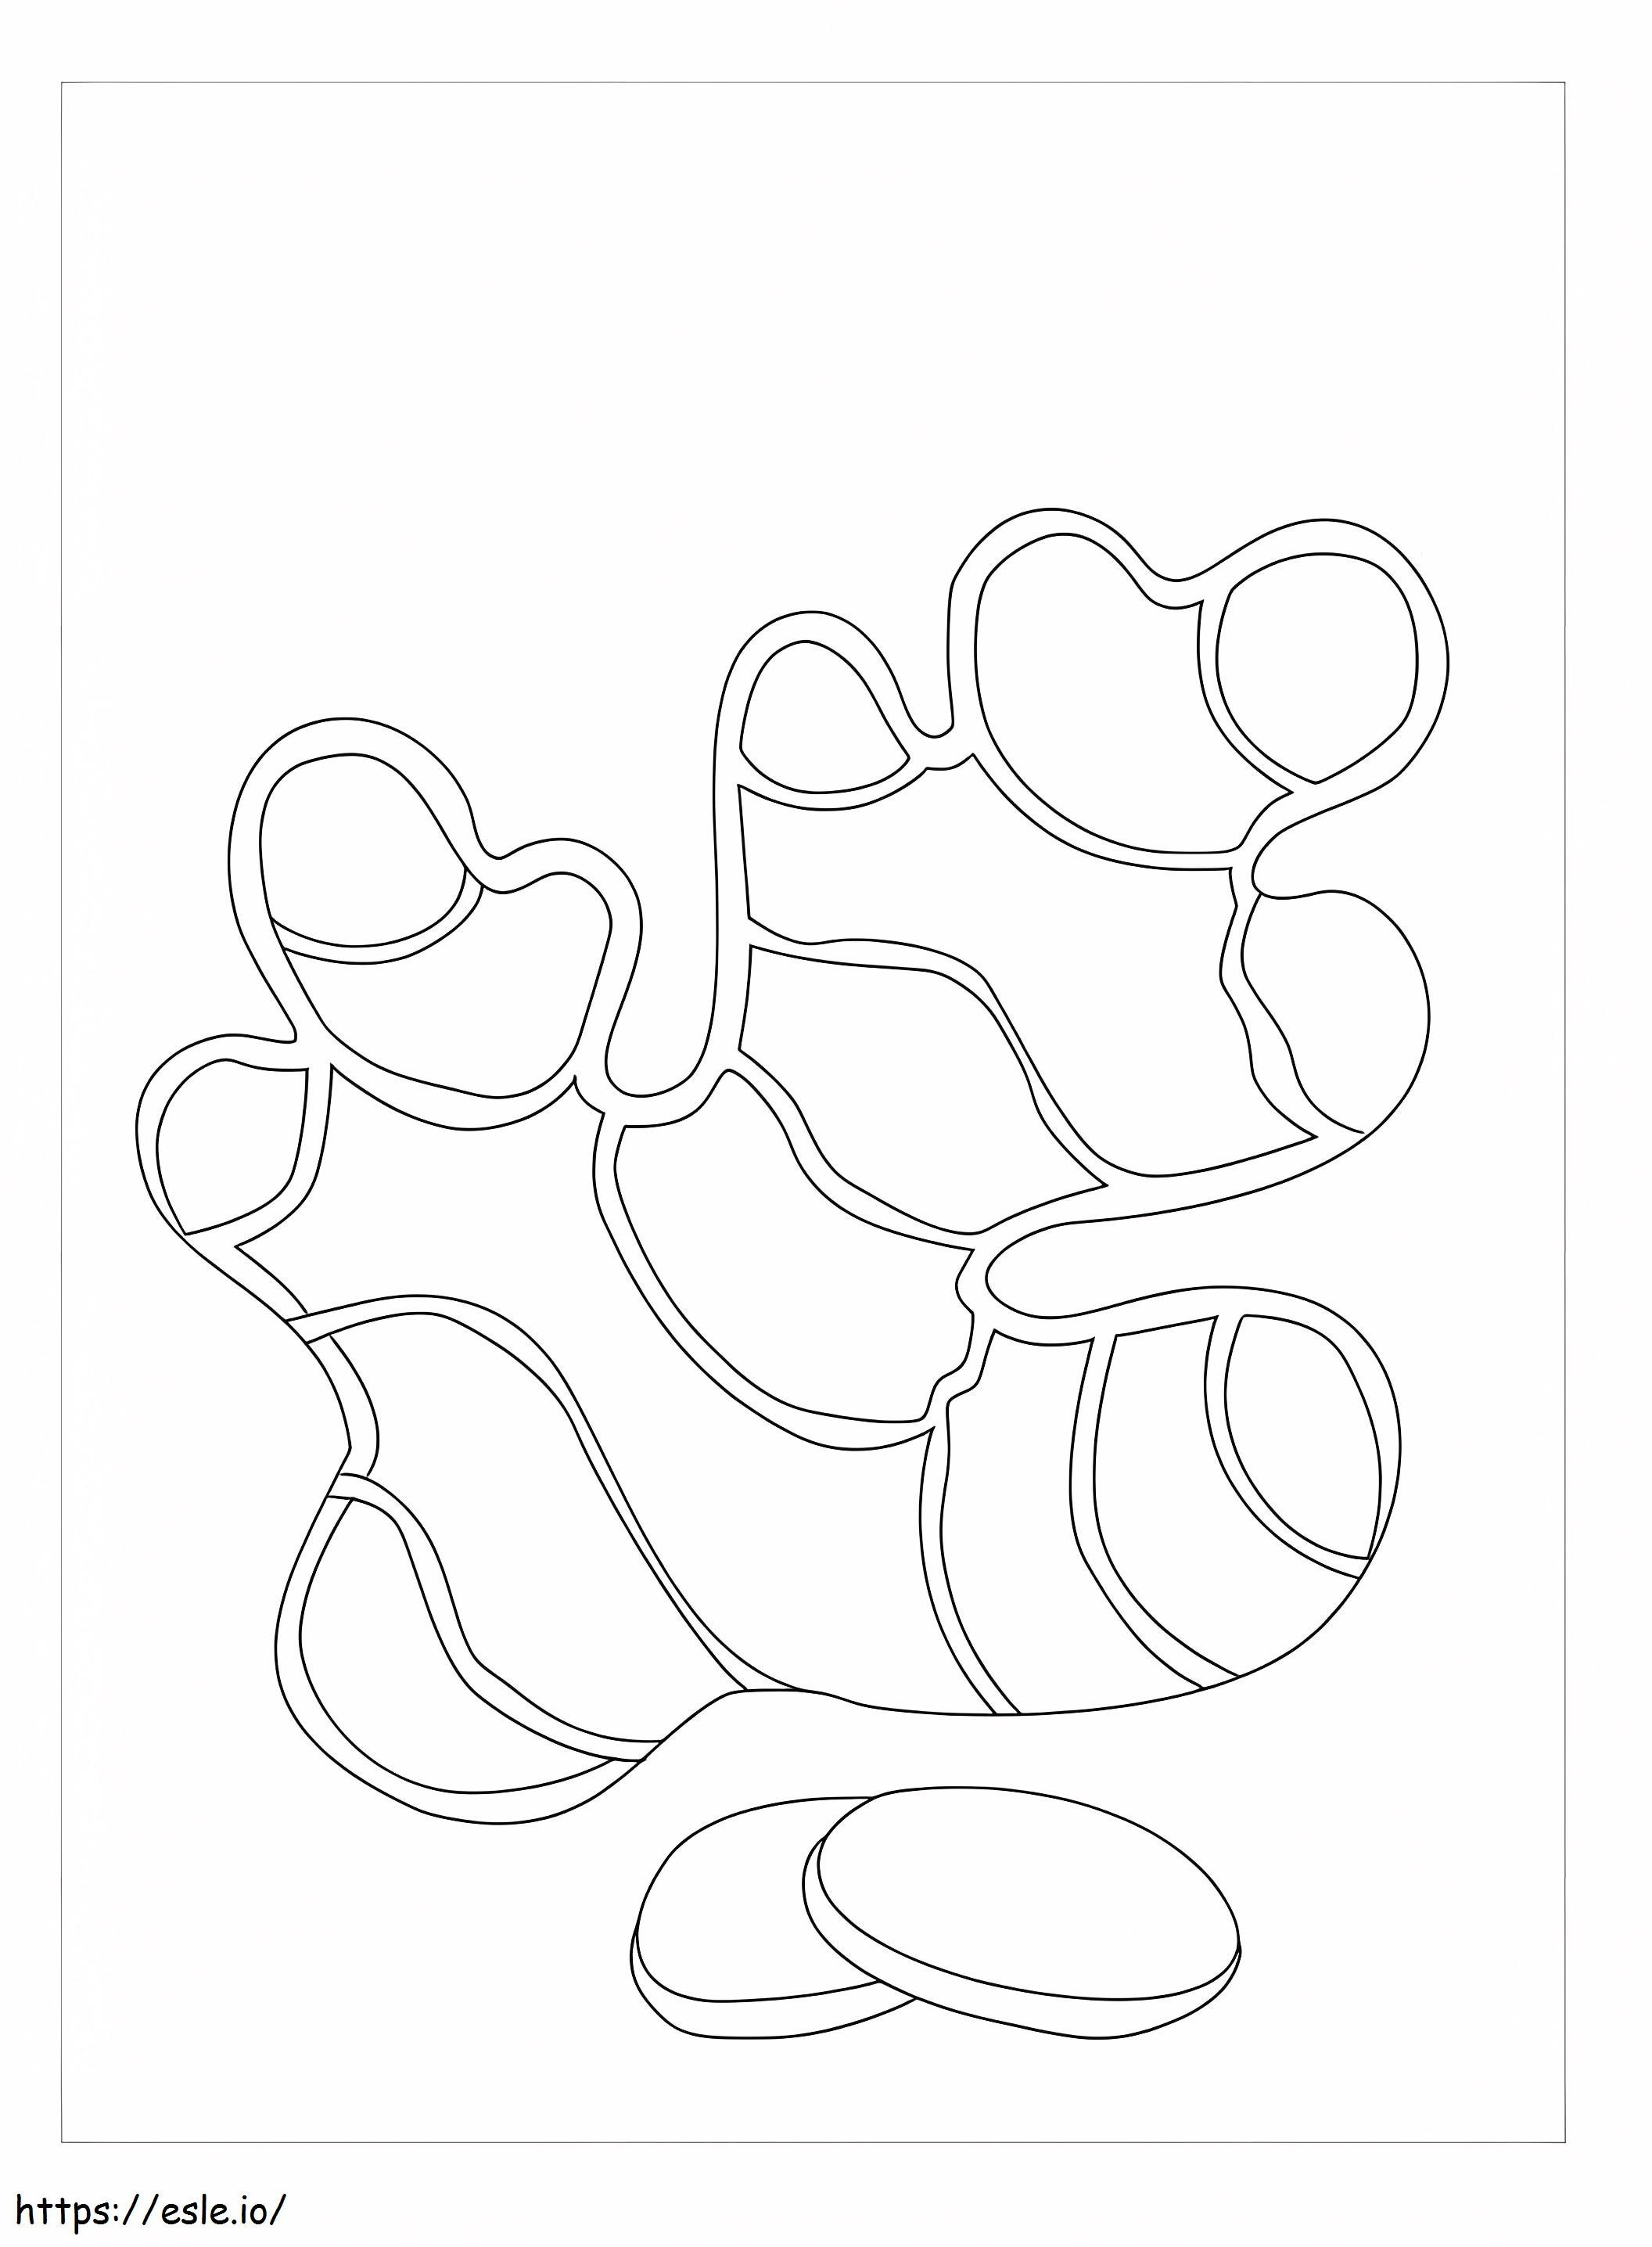 Basic Ginger coloring page